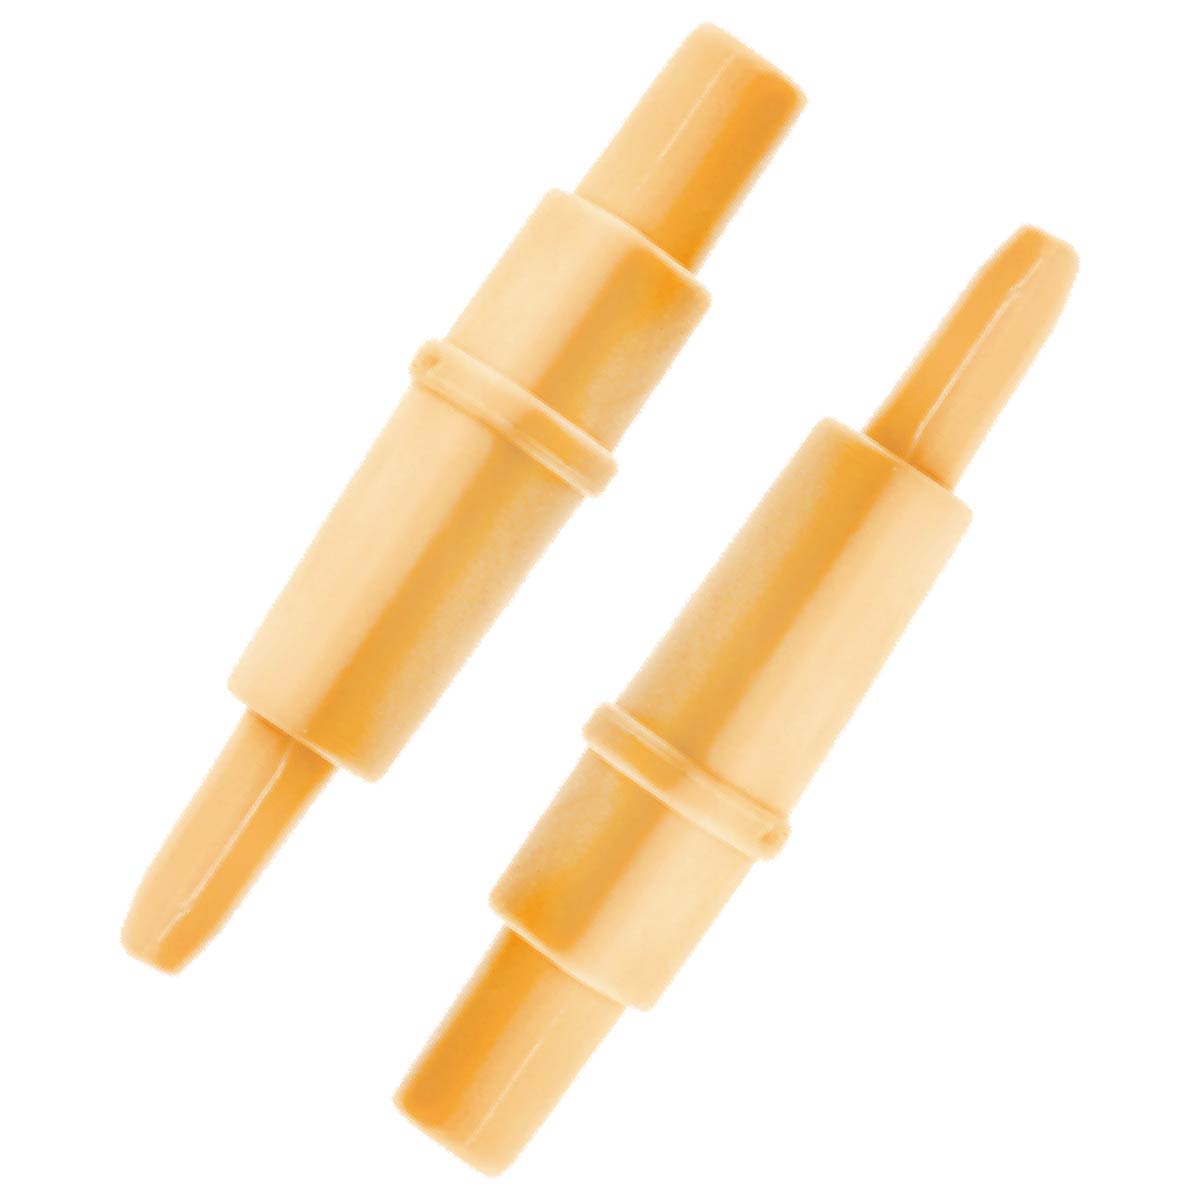 Maymom Connector Adapter; connects between a Medela Swing and Swing Maxi motor and a bare end tubing; 2pc